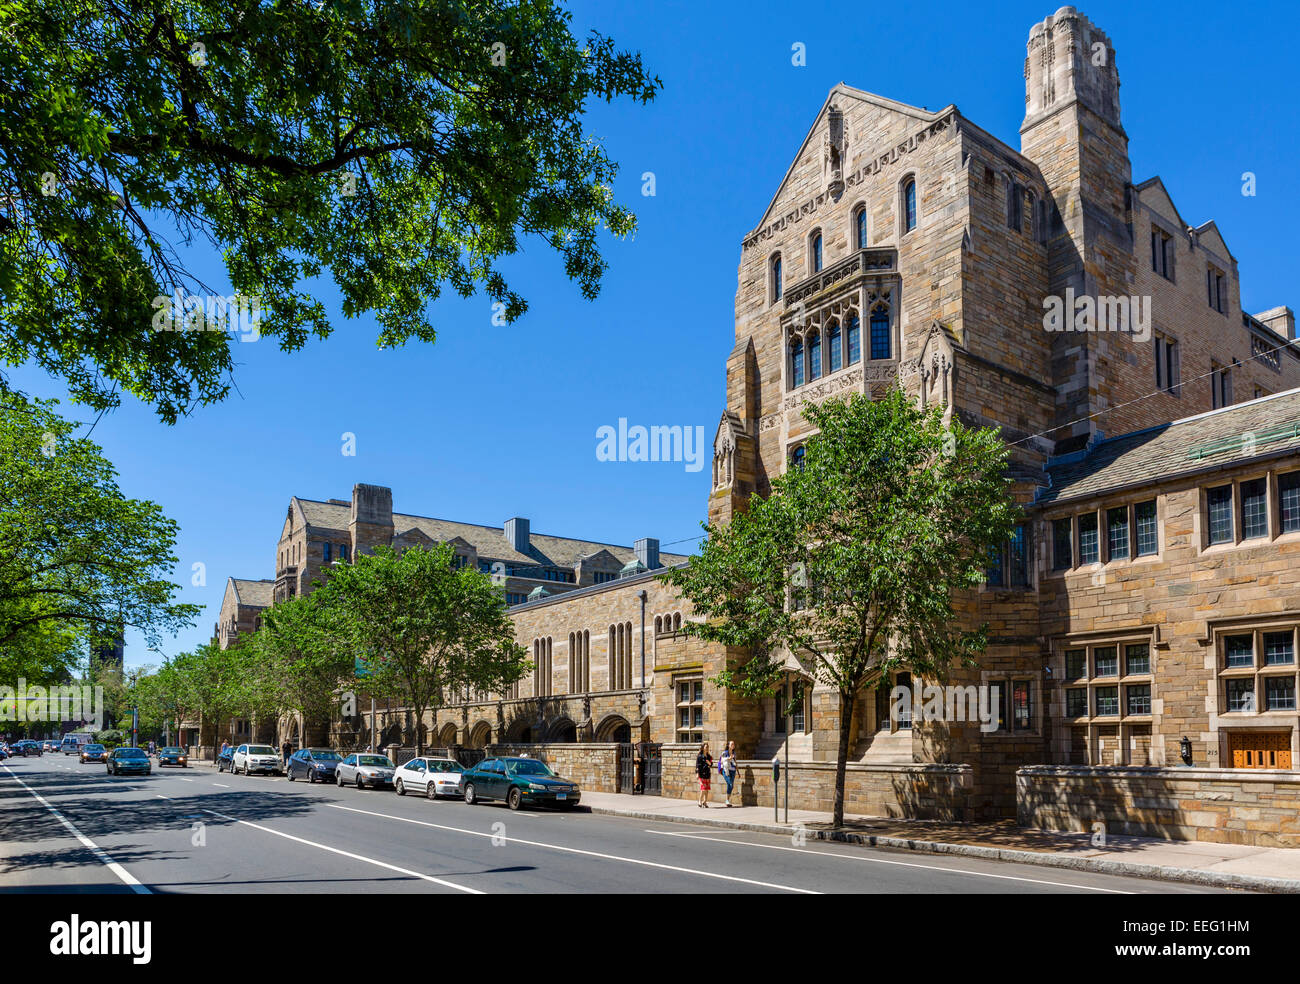 Trumbull College on Elm Street, Yale University, New Haven, Connecticut, USA Stockfoto